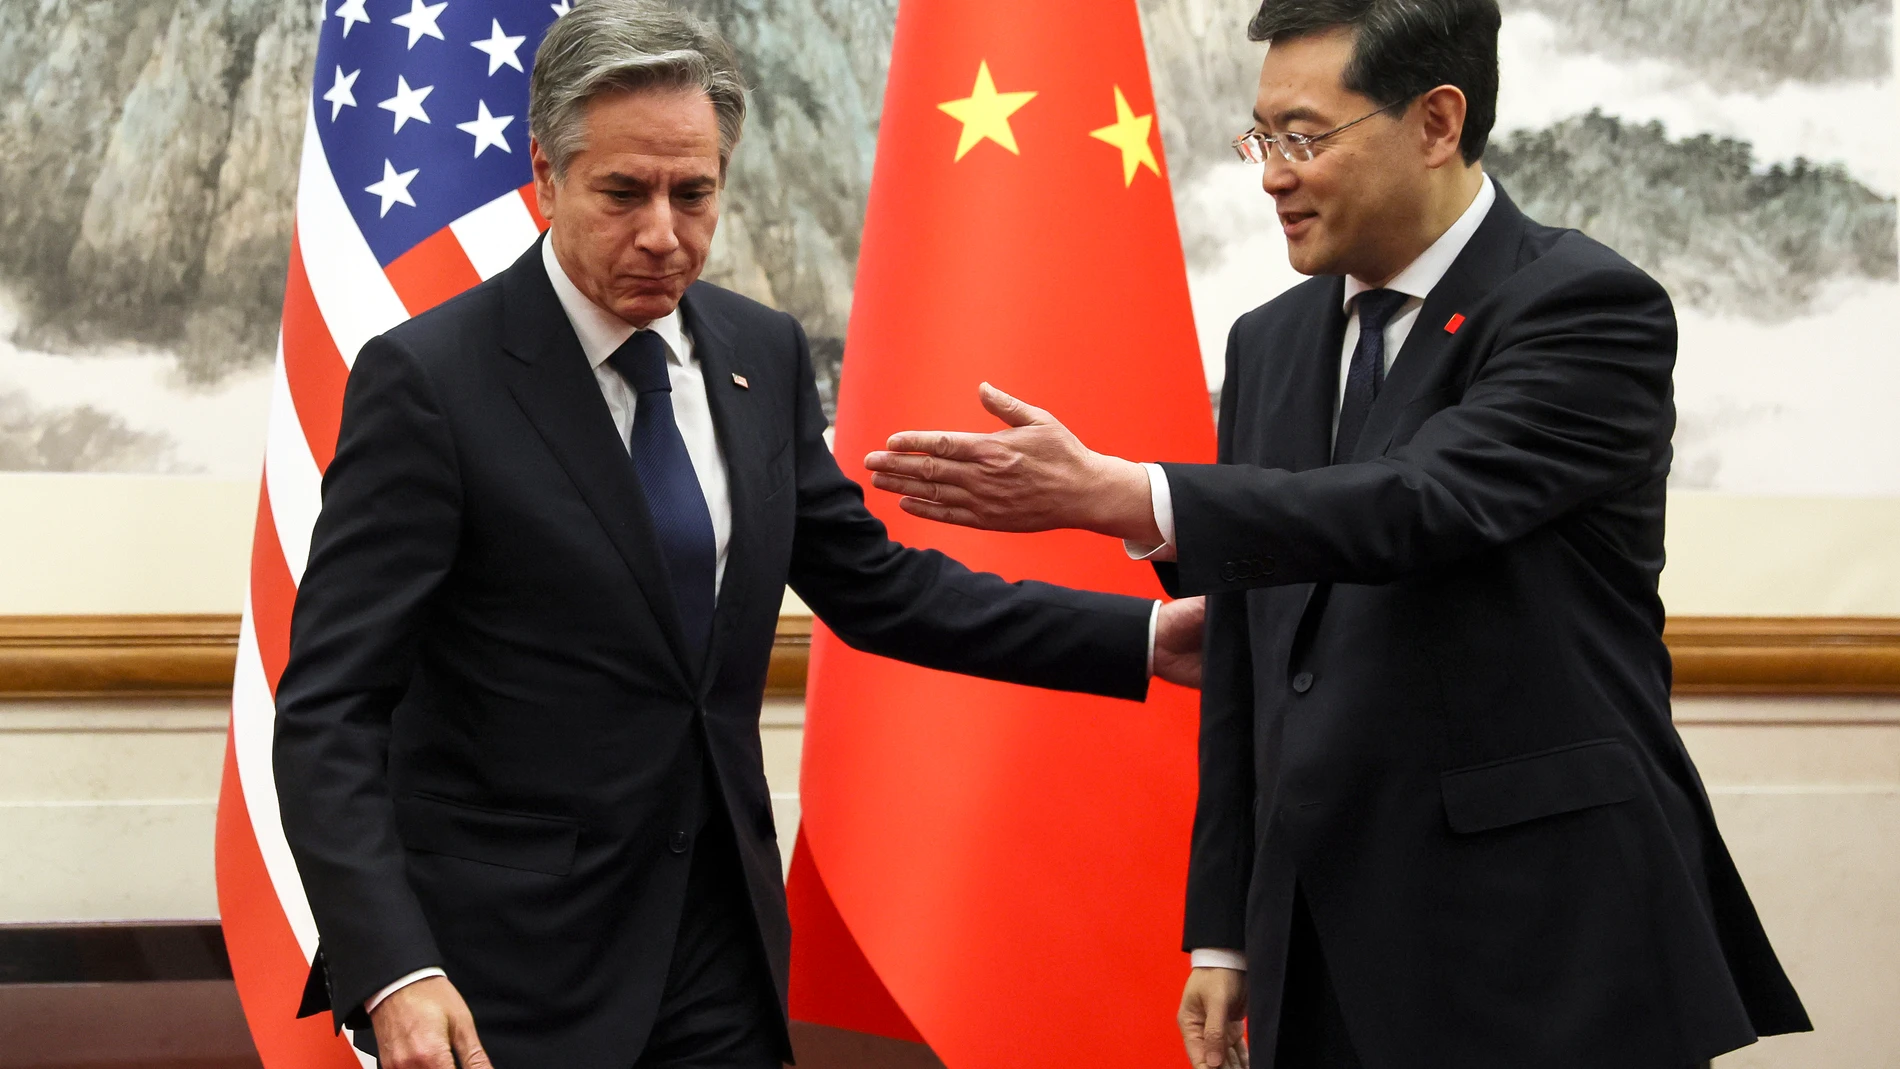 U.S. Secretary of State Antony Blinken, left, meets with Chinese Foreign Minister Qin Gang, right, at the Diaoyutai State Guesthouse in Beijing, China, Sunday, June 18, 2023. (Leah Millis/Pool Photo via AP)